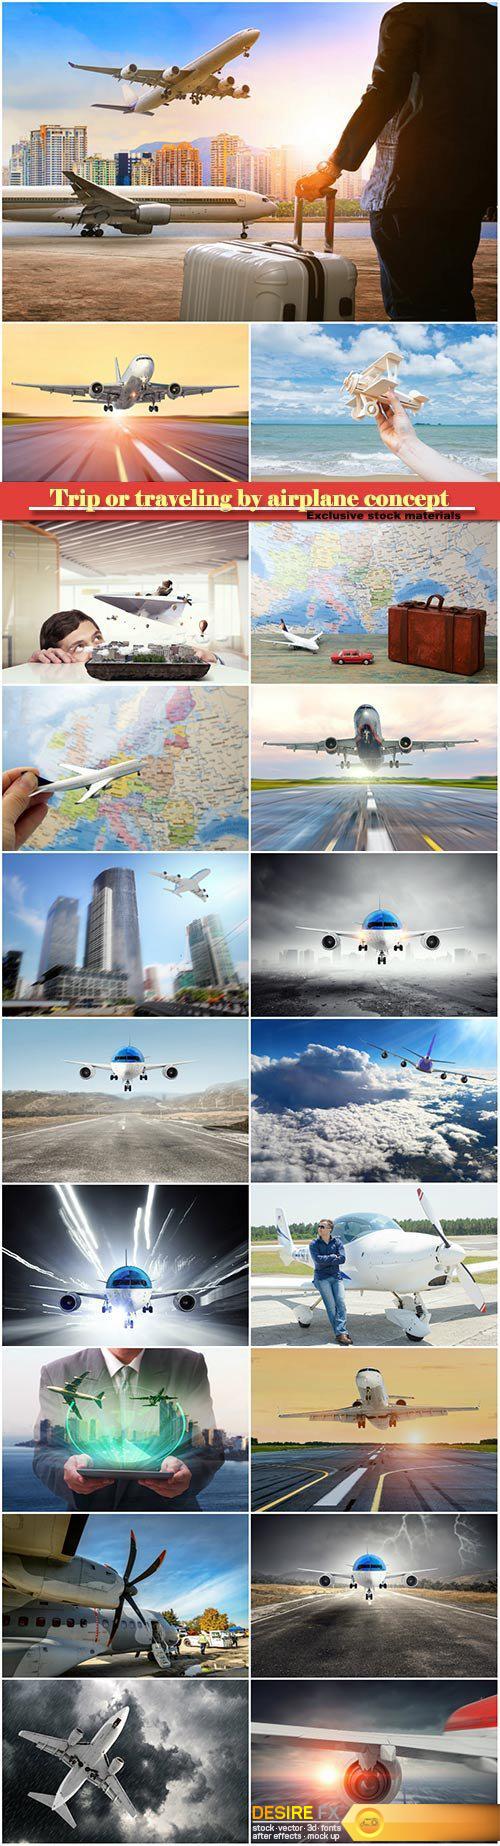 Trip or traveling by airplane concept